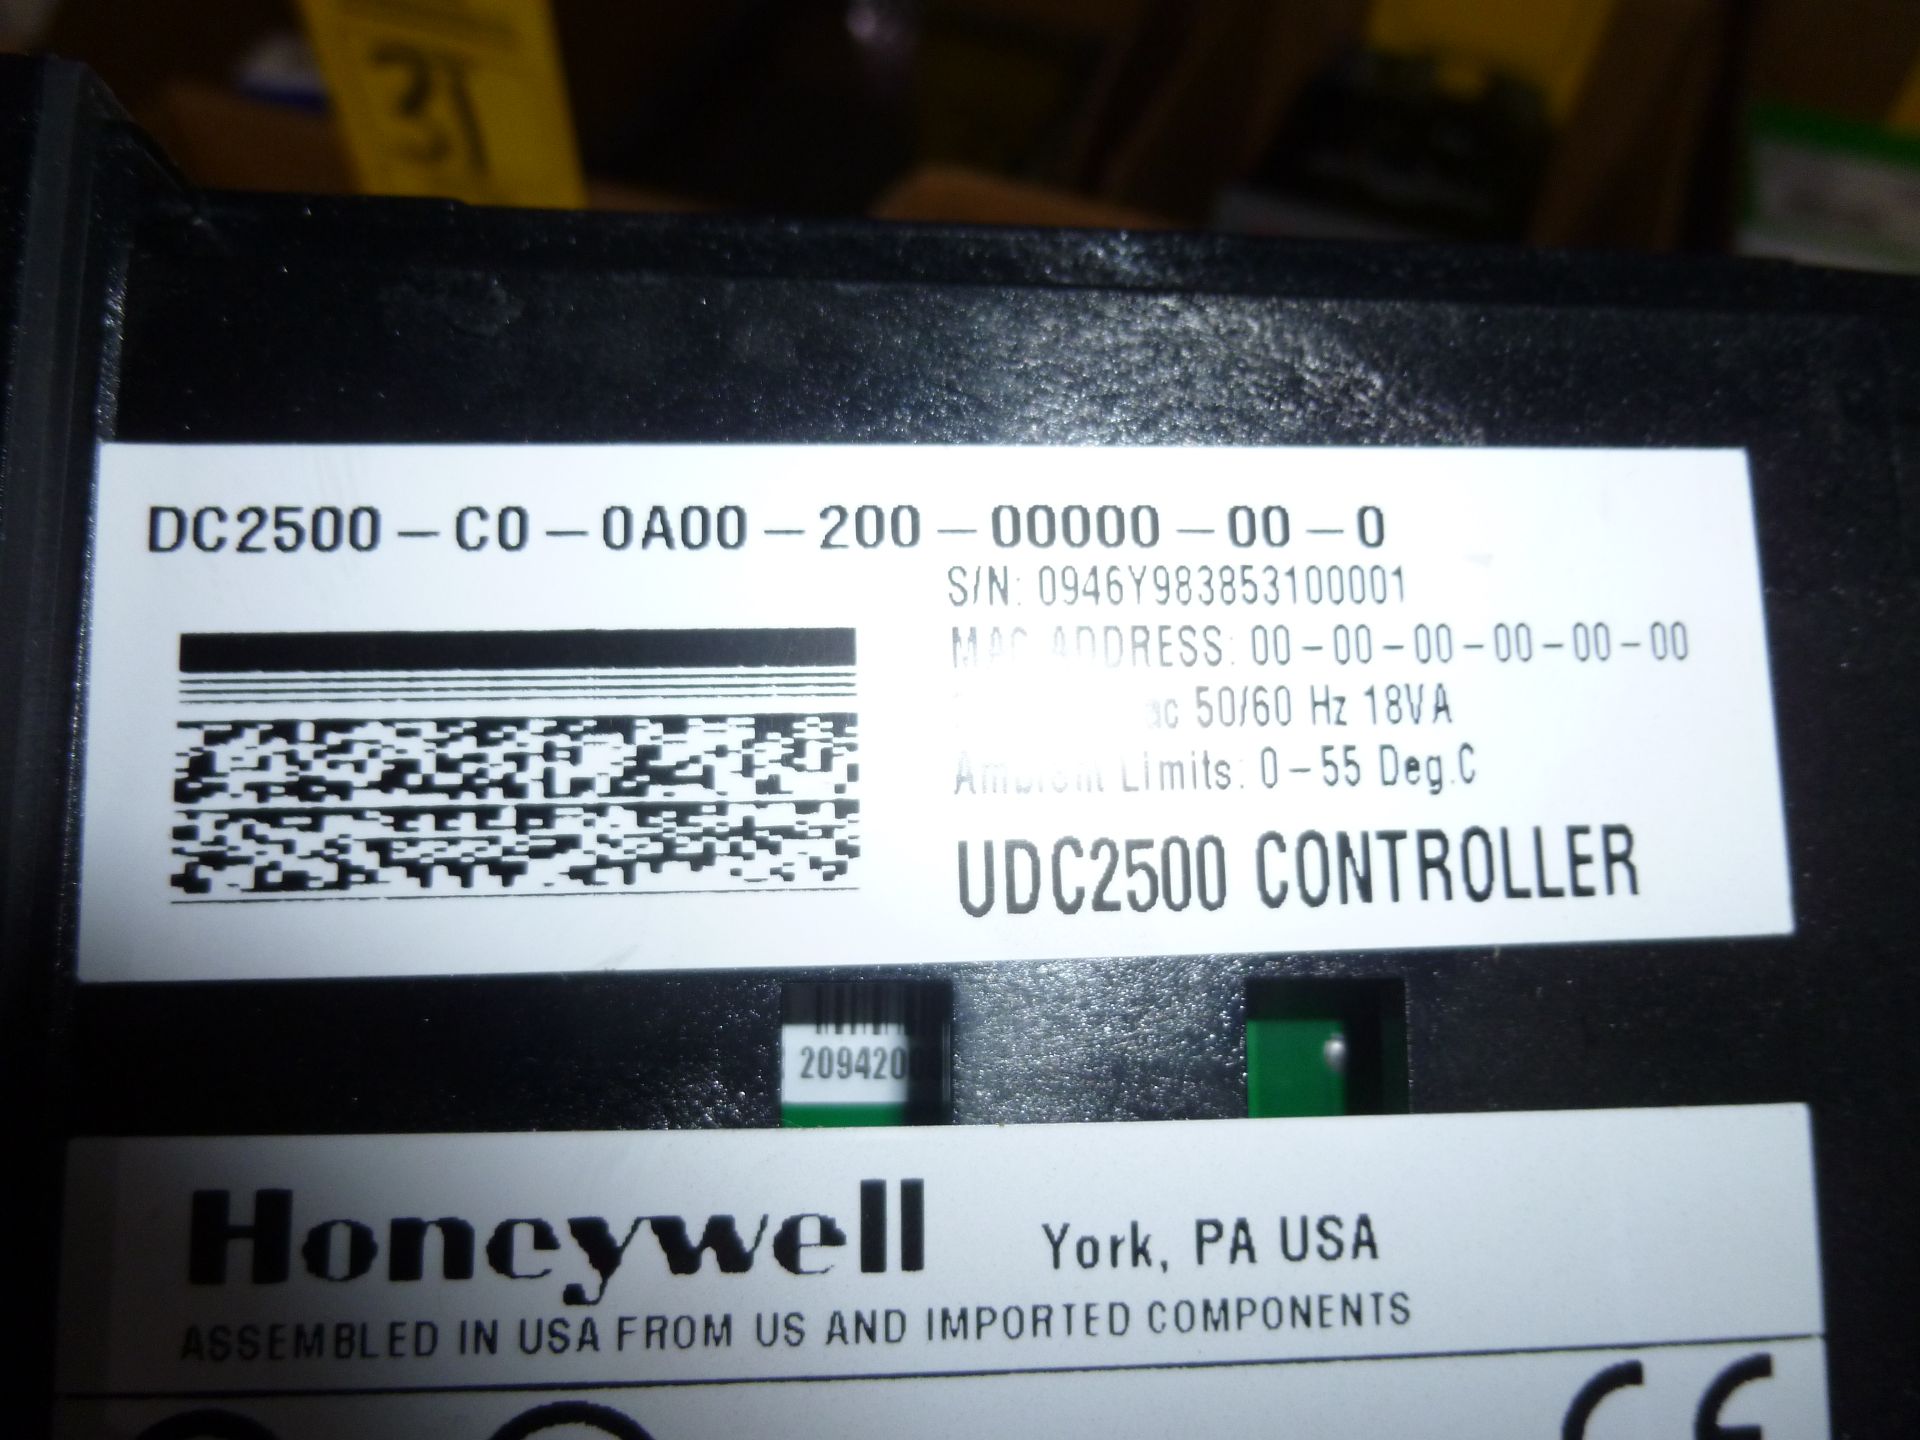 Honeywell controller UDC2500 part number DC2500-C0-0A00-200-00000-00-0 new, as always with Brolyn - Image 3 of 3